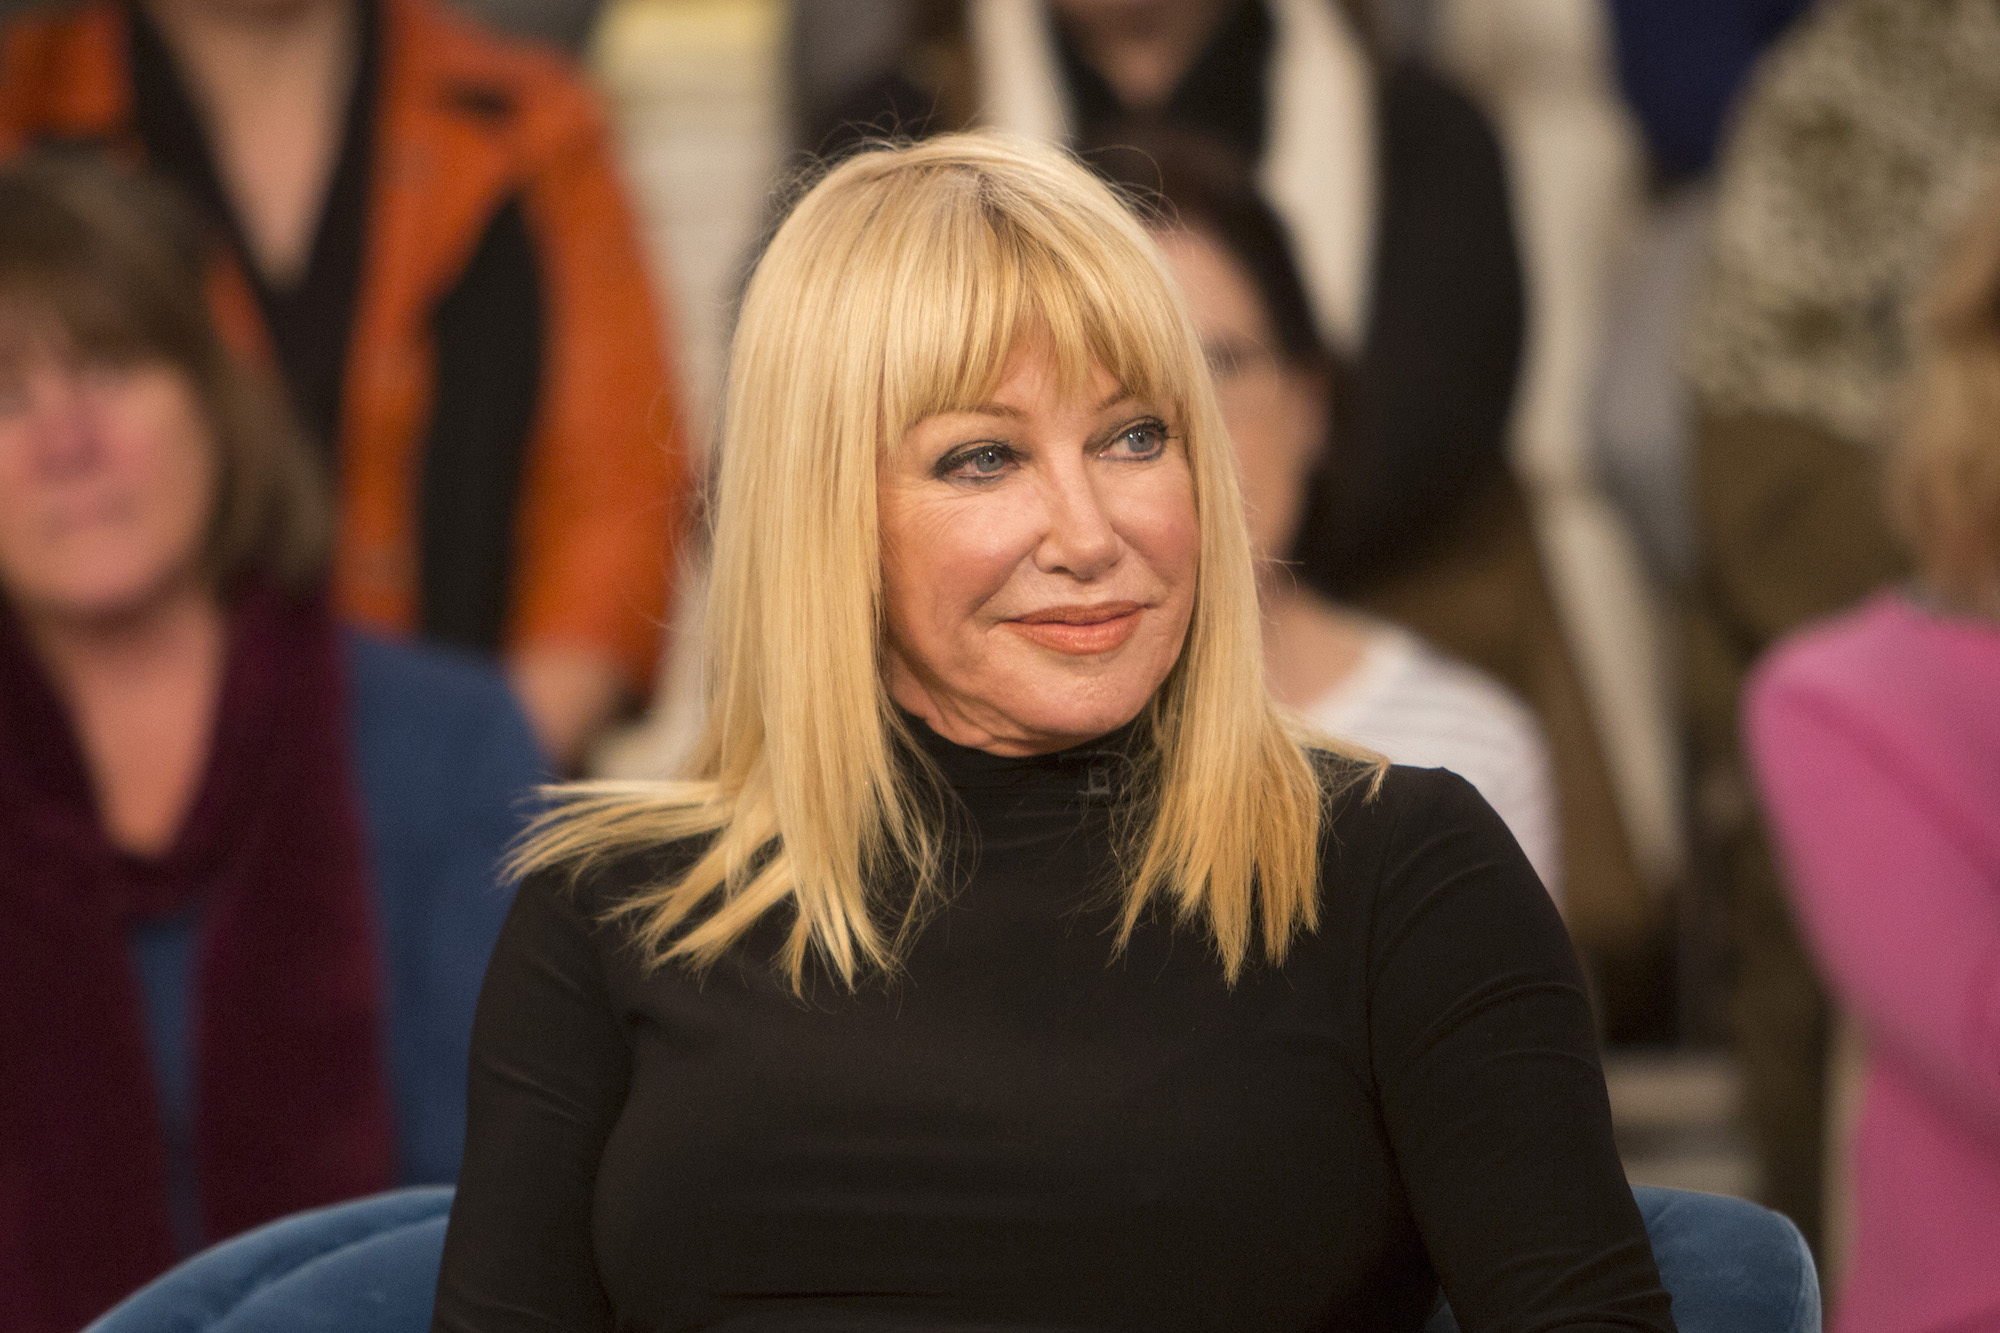 Suzanne Somers smiling, seated in front of a blurred audience